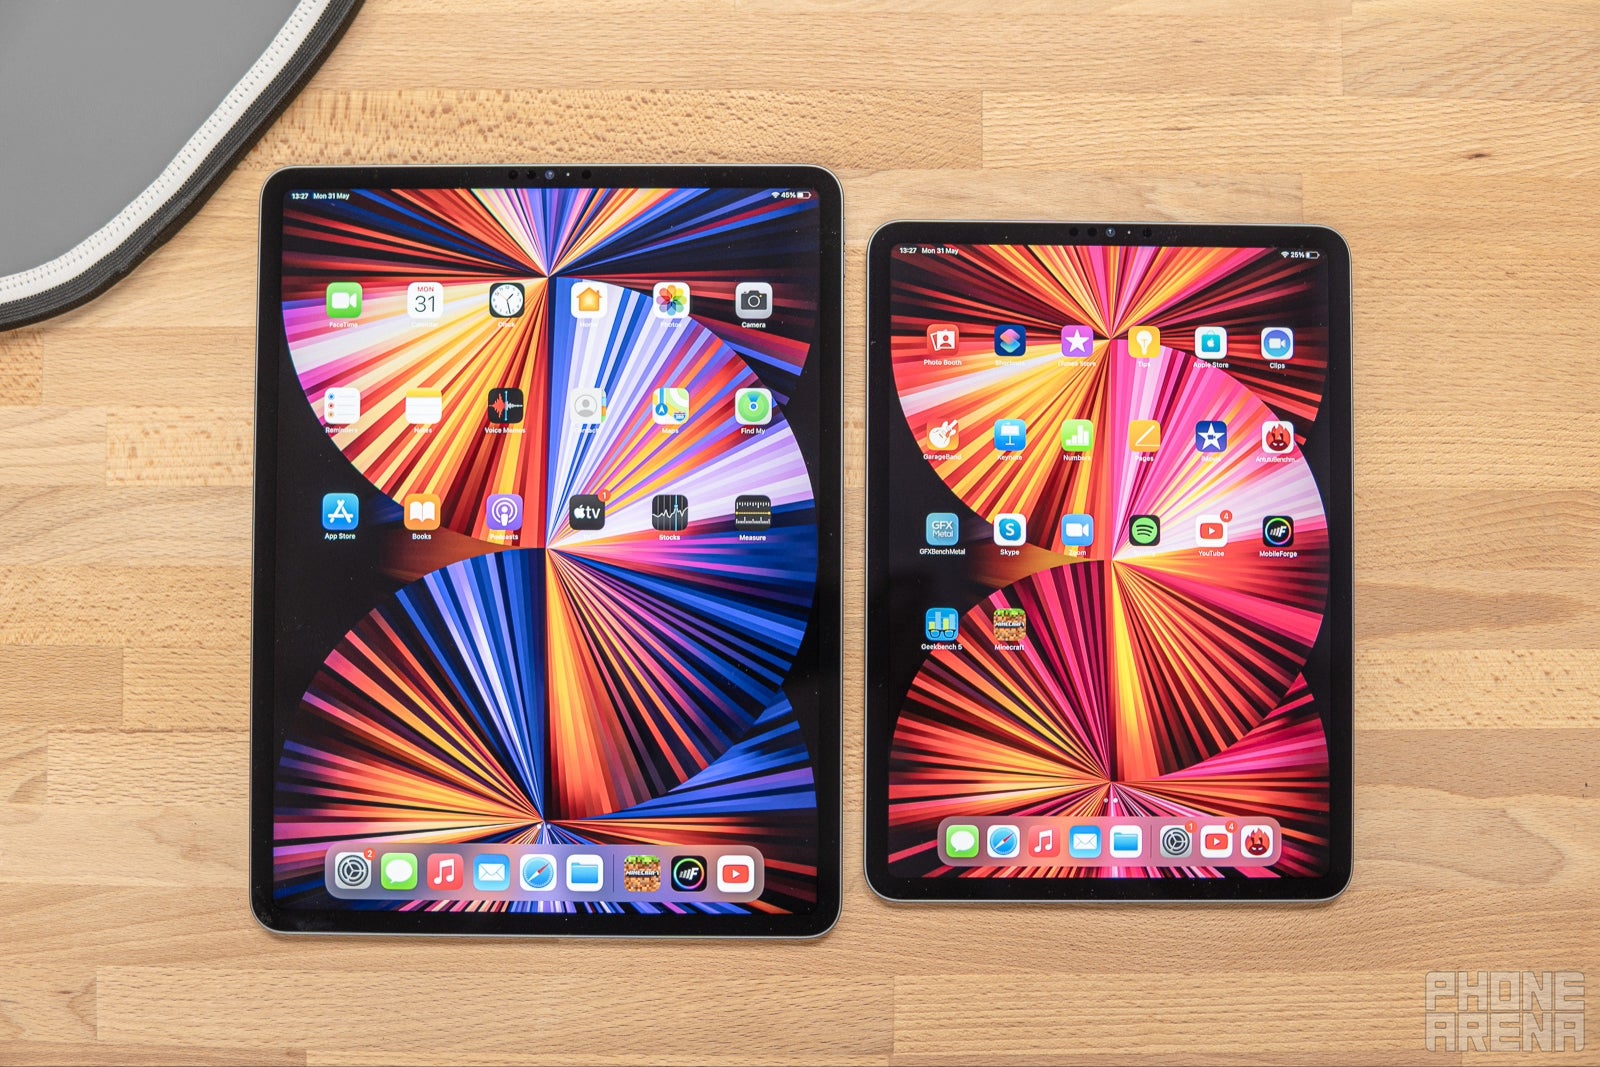 12.9-inch iPad Pro with mini-LED next to 11-inch iPad Pro with LCD (Image Credit–PhoneArena) - No mini-LED display for the rumored 12.9-inch iPad Air after all: LCD said to remain